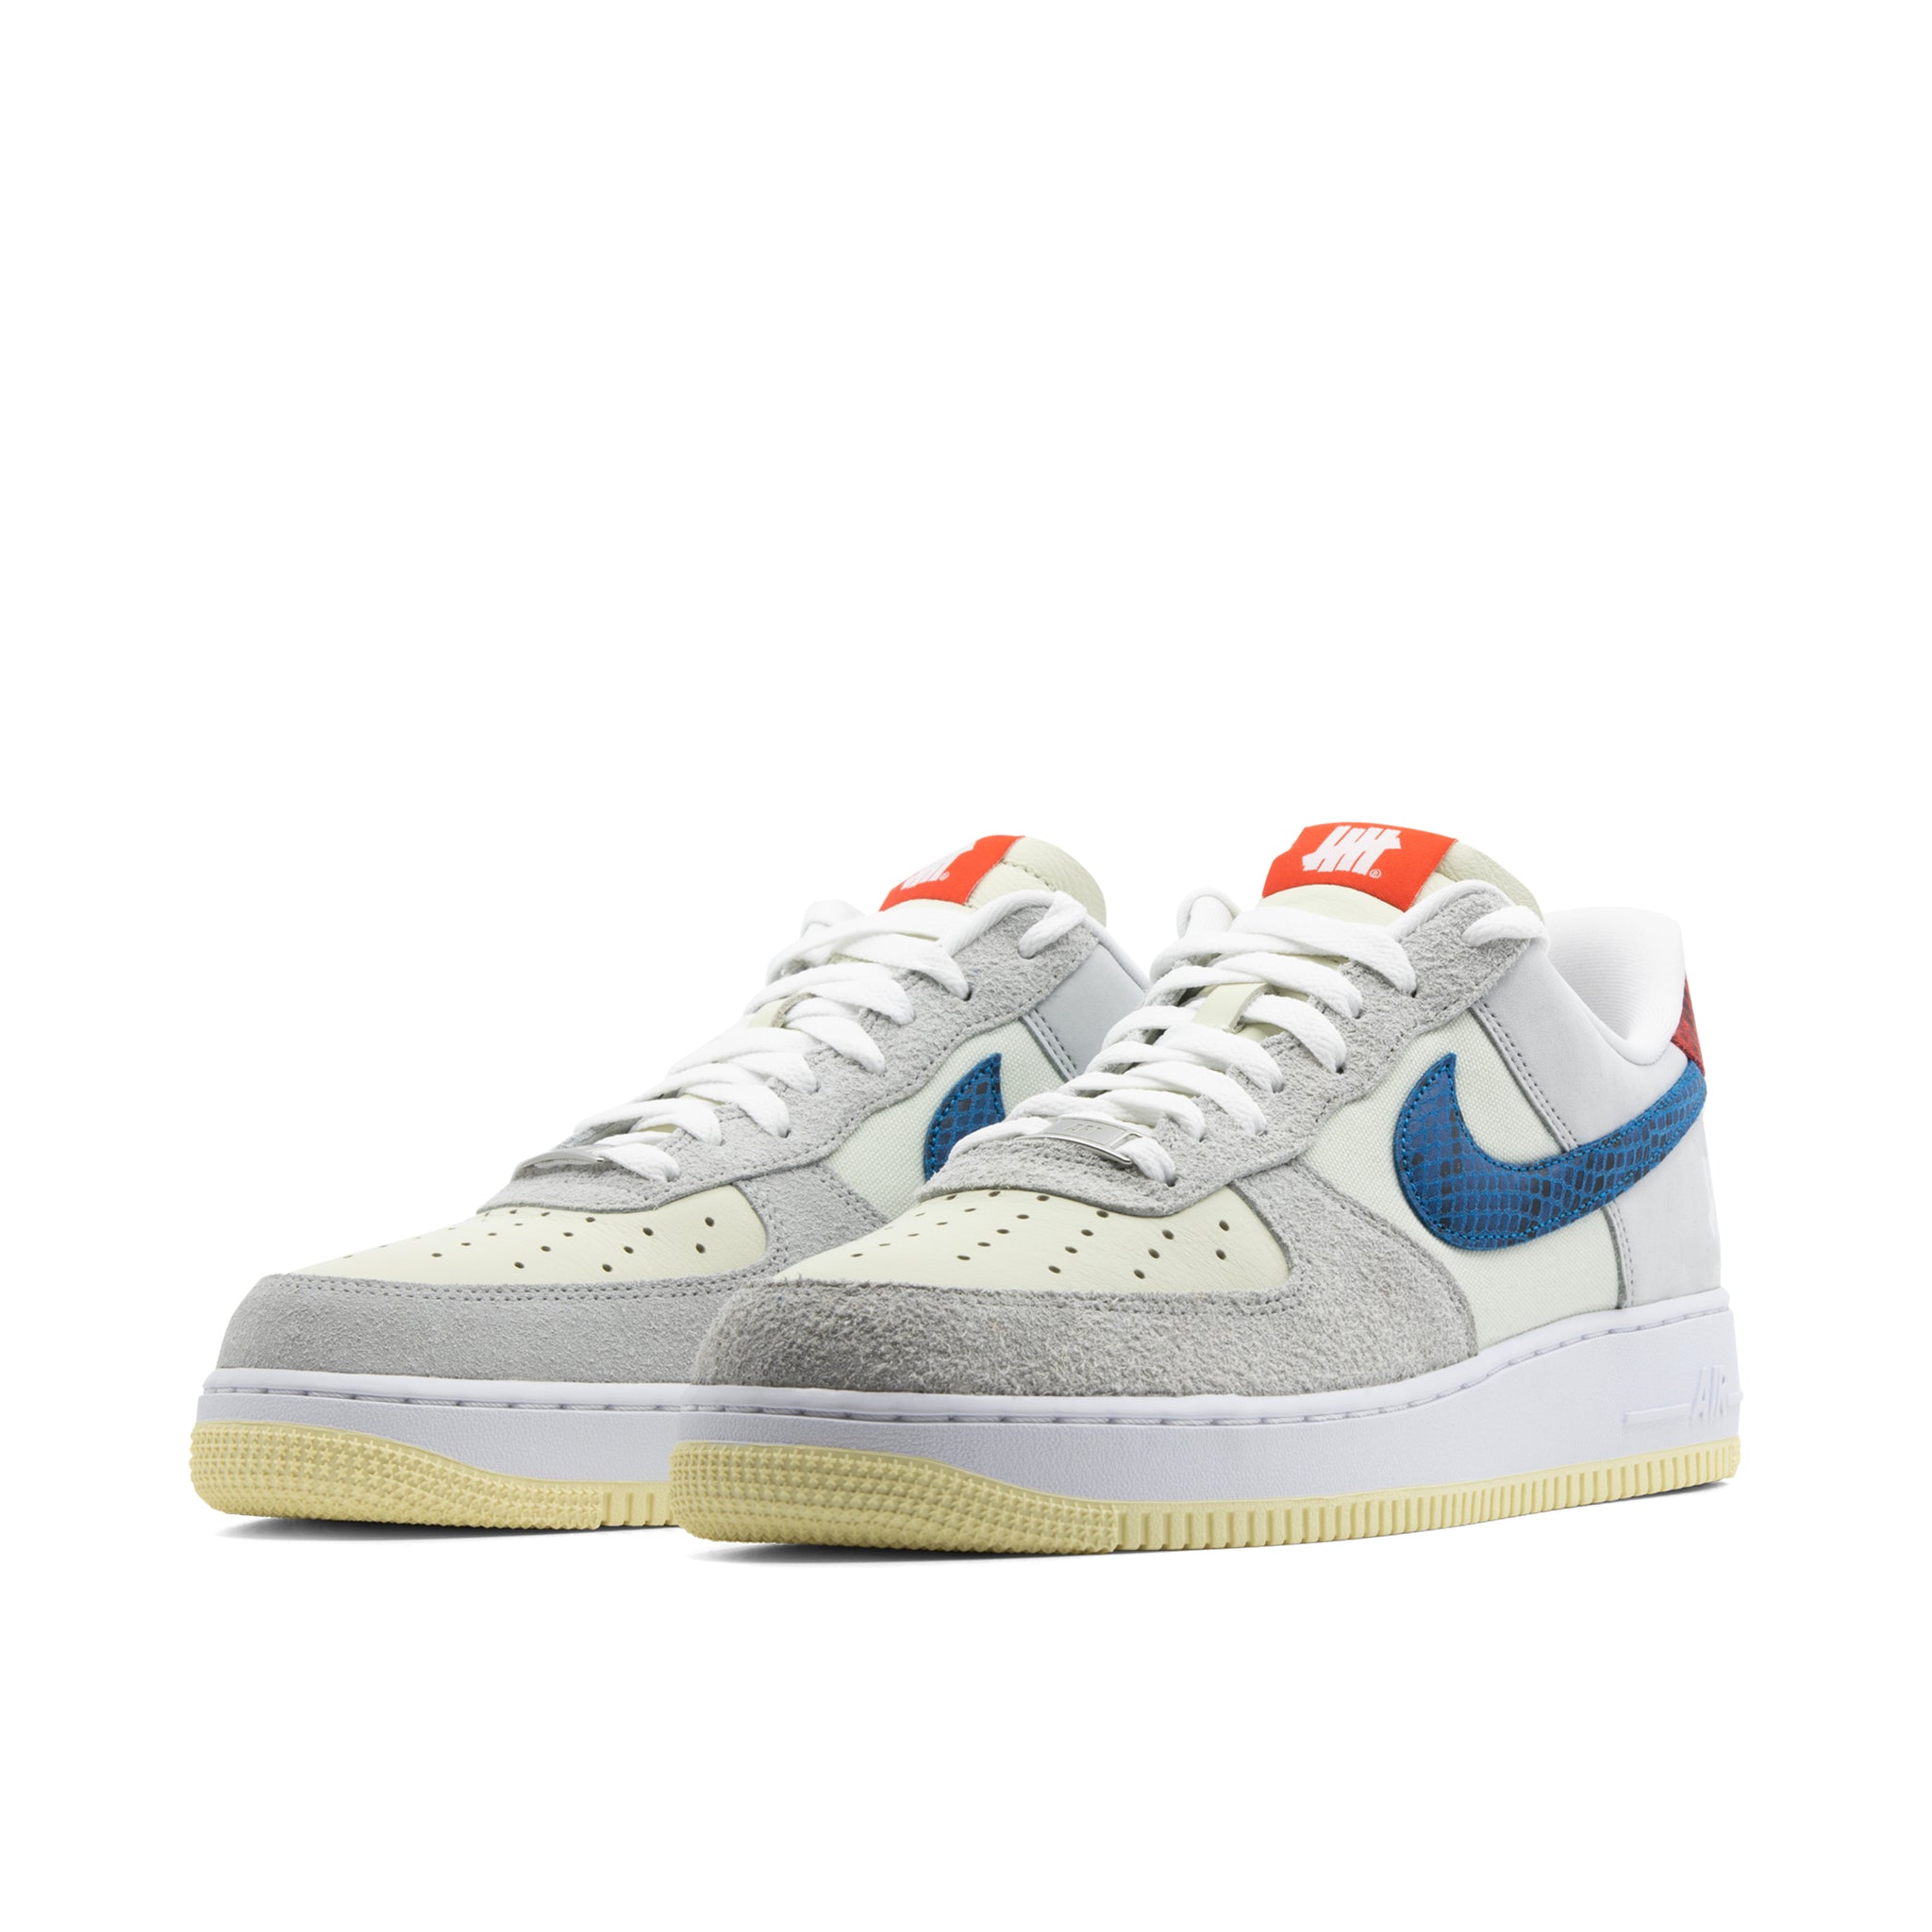 NIKE AIR FORCE 1 LOW UNDFTD 5 ON IT